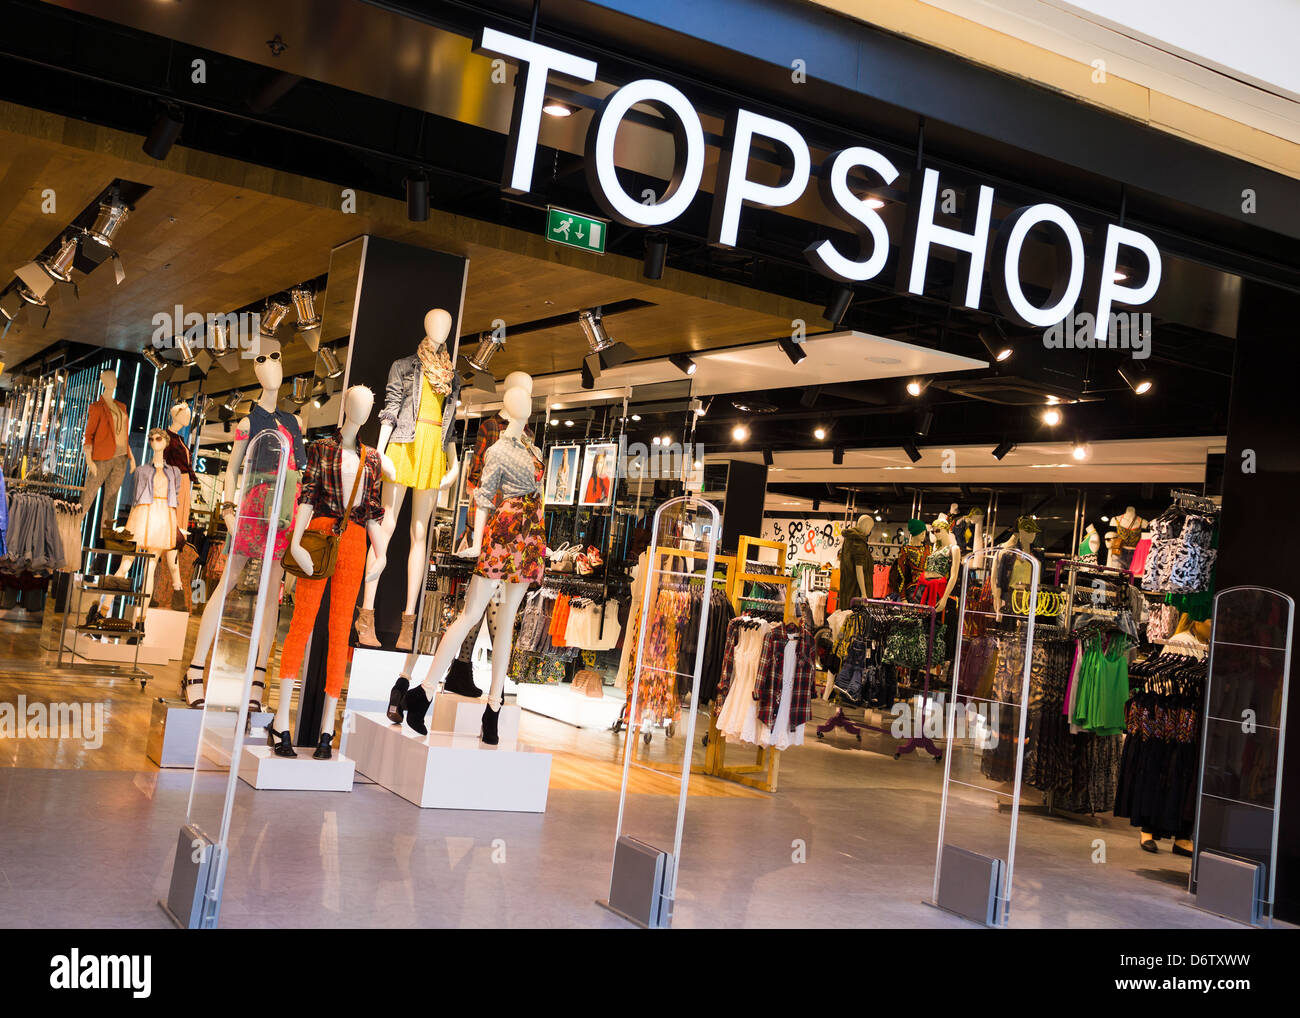 Topshop Store Front High Resolution Stock Photography and Images - Alamy